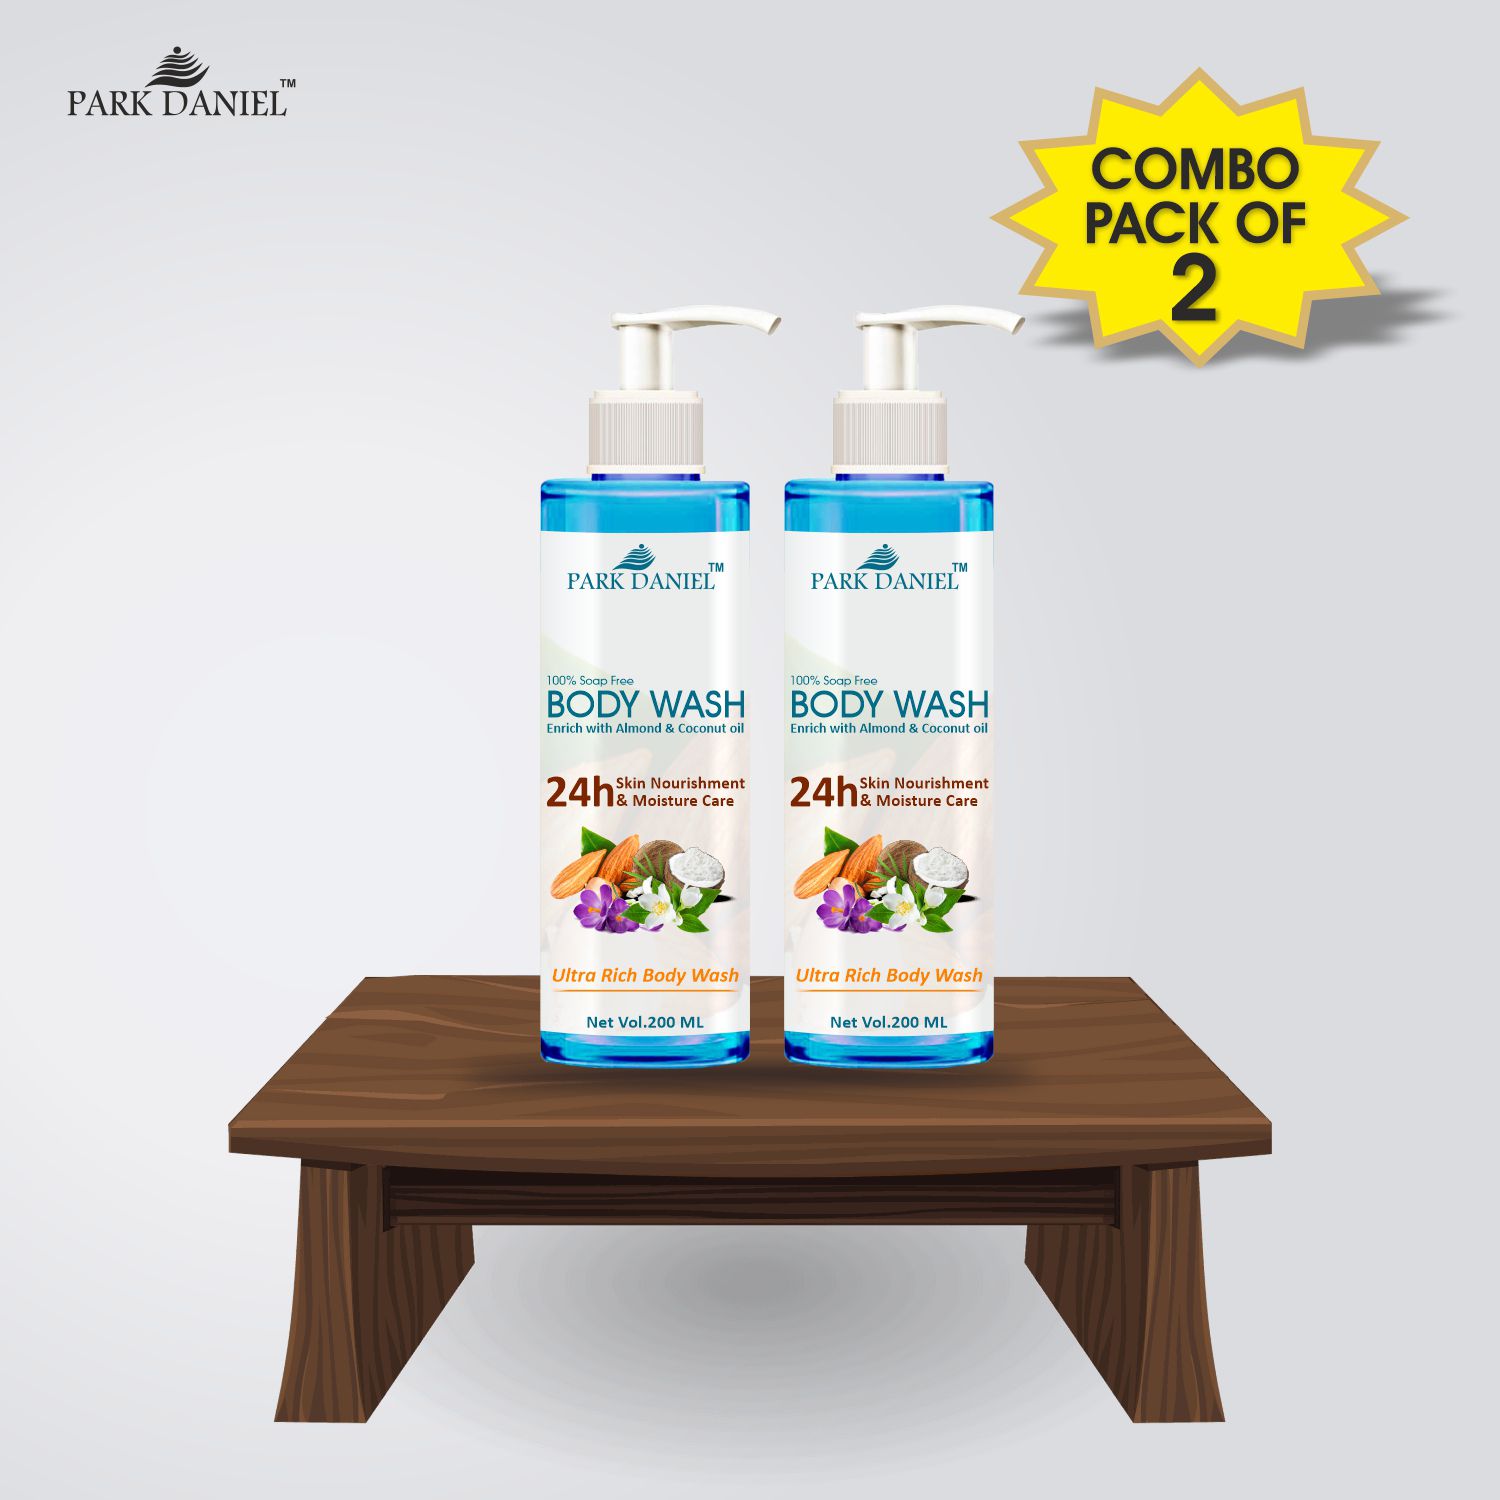     			Park Daniel  Premium Body Wash  Enriched With Almond and Coconut Oil Body Wash 400 mL Pack of 2